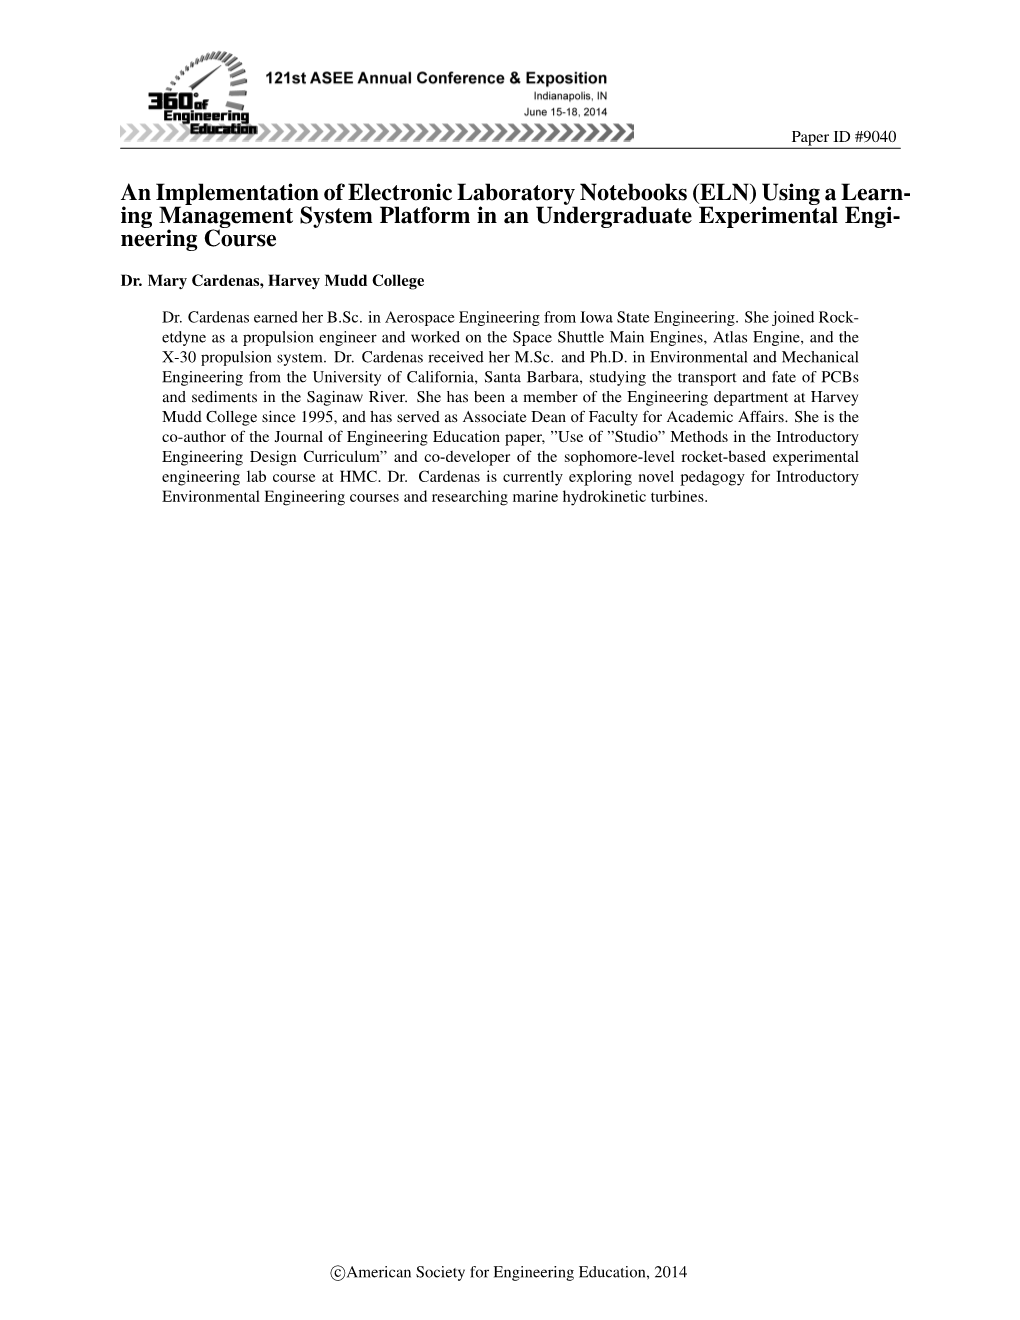 An Implementation of Electronic Laboratory Notebooks (ELN) Using a Learn- Ing Management System Platform in an Undergraduate Experimental Engi- Neering Course